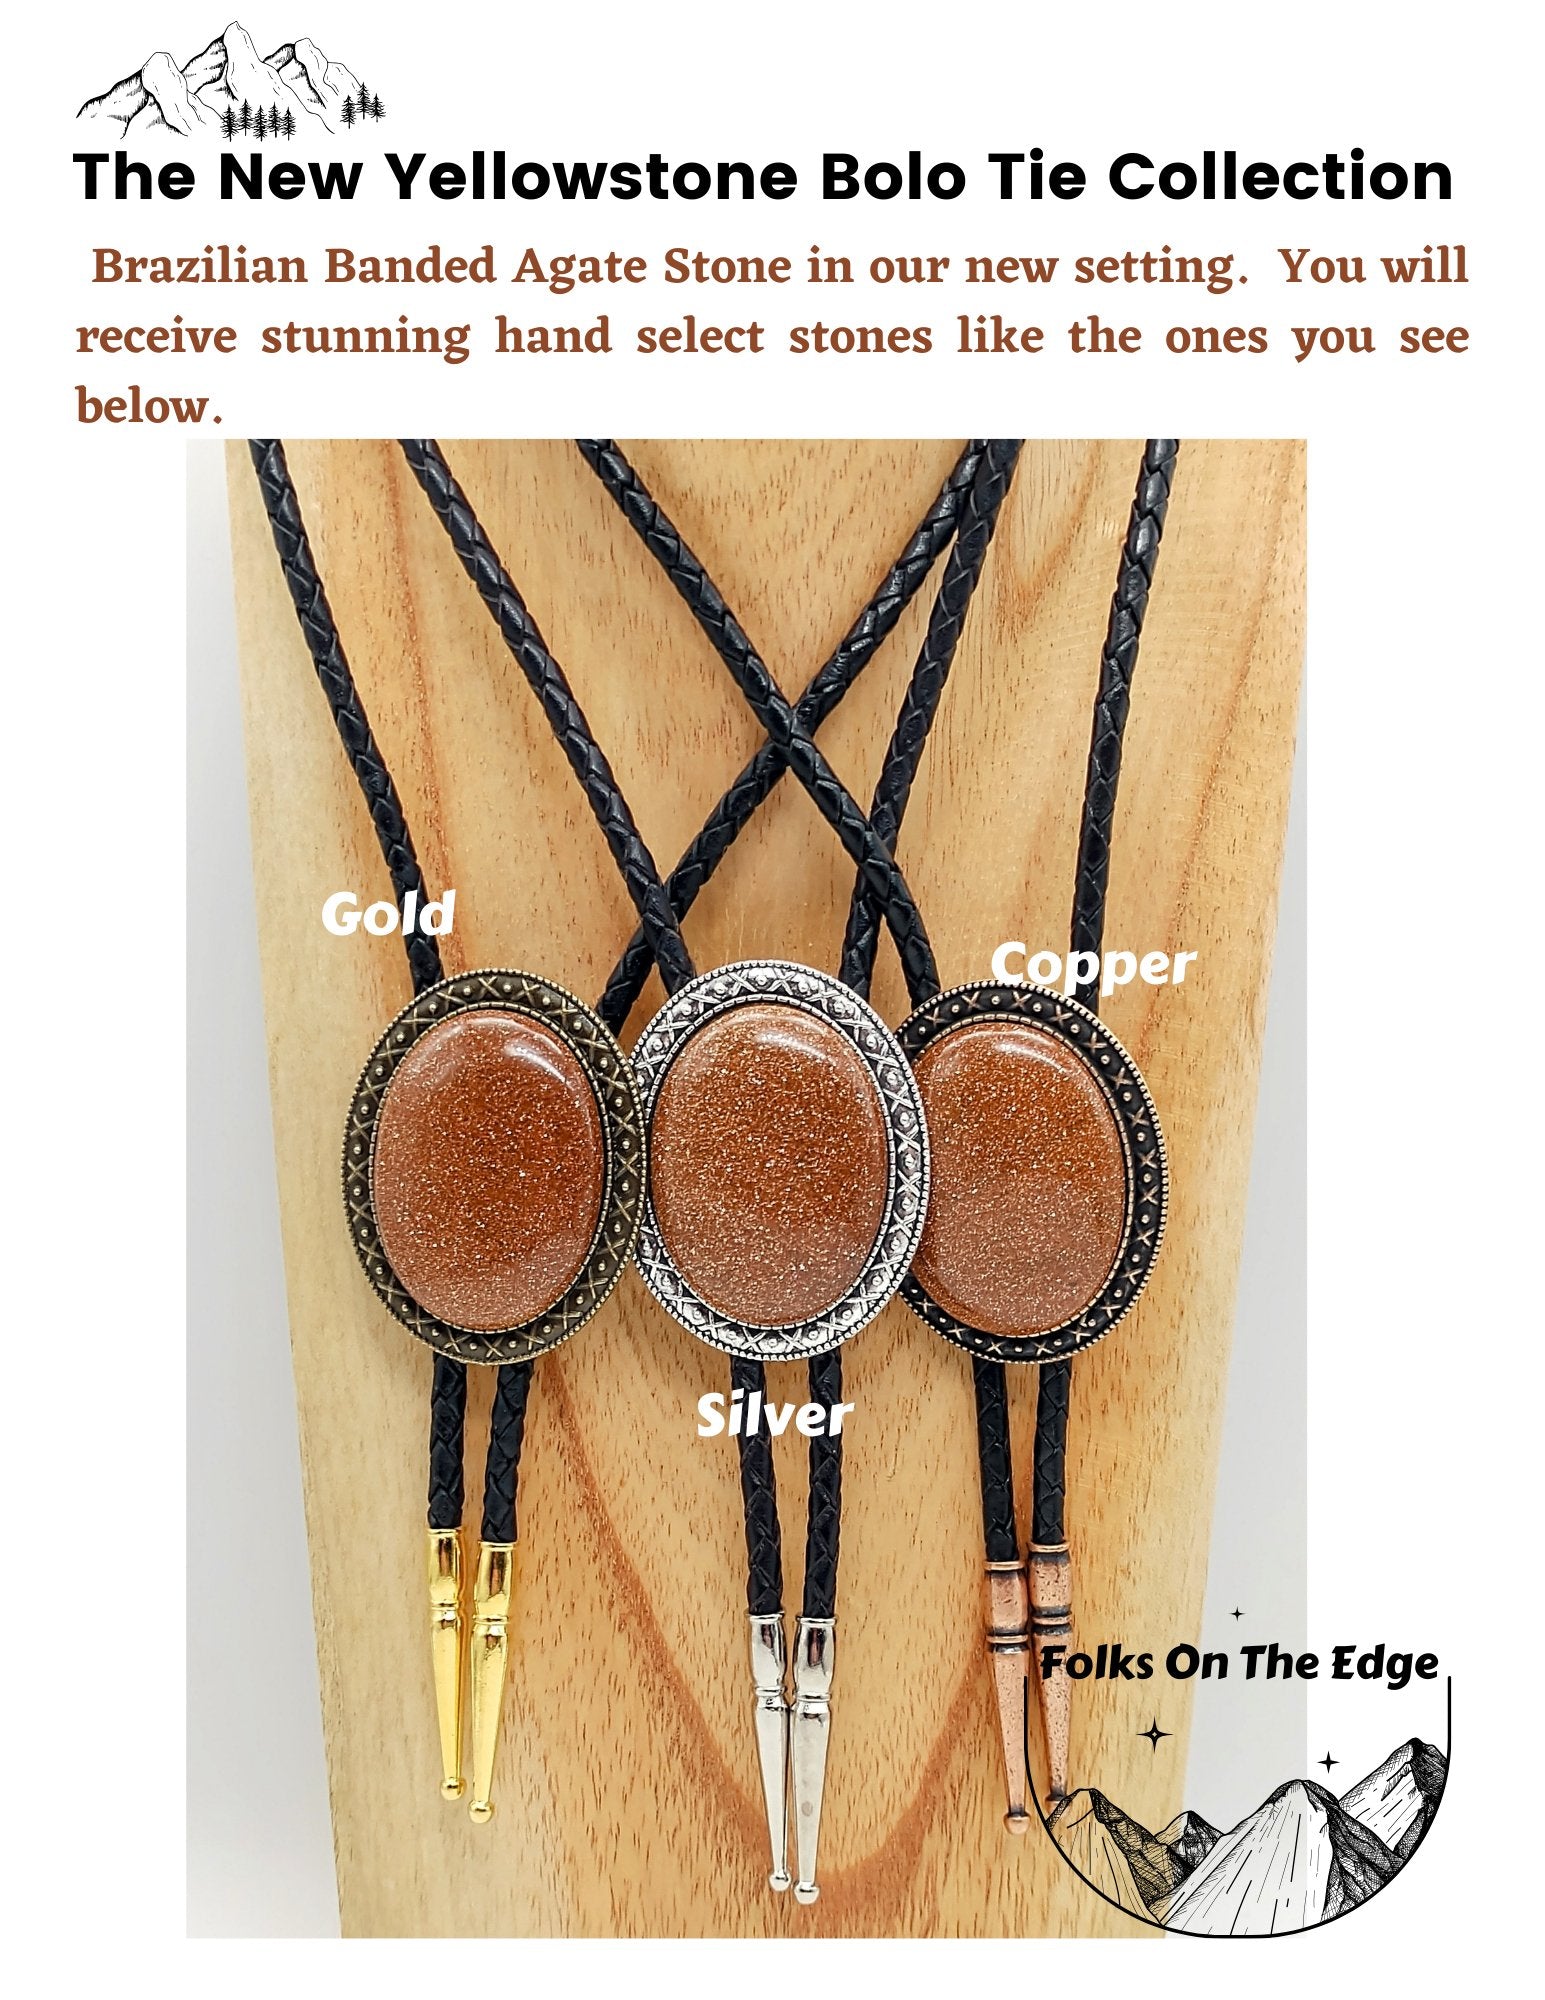 Yellowstone Bolo Tie with Copper Goldstone in Gold, Silver or Copper colors - Folks On The Edge